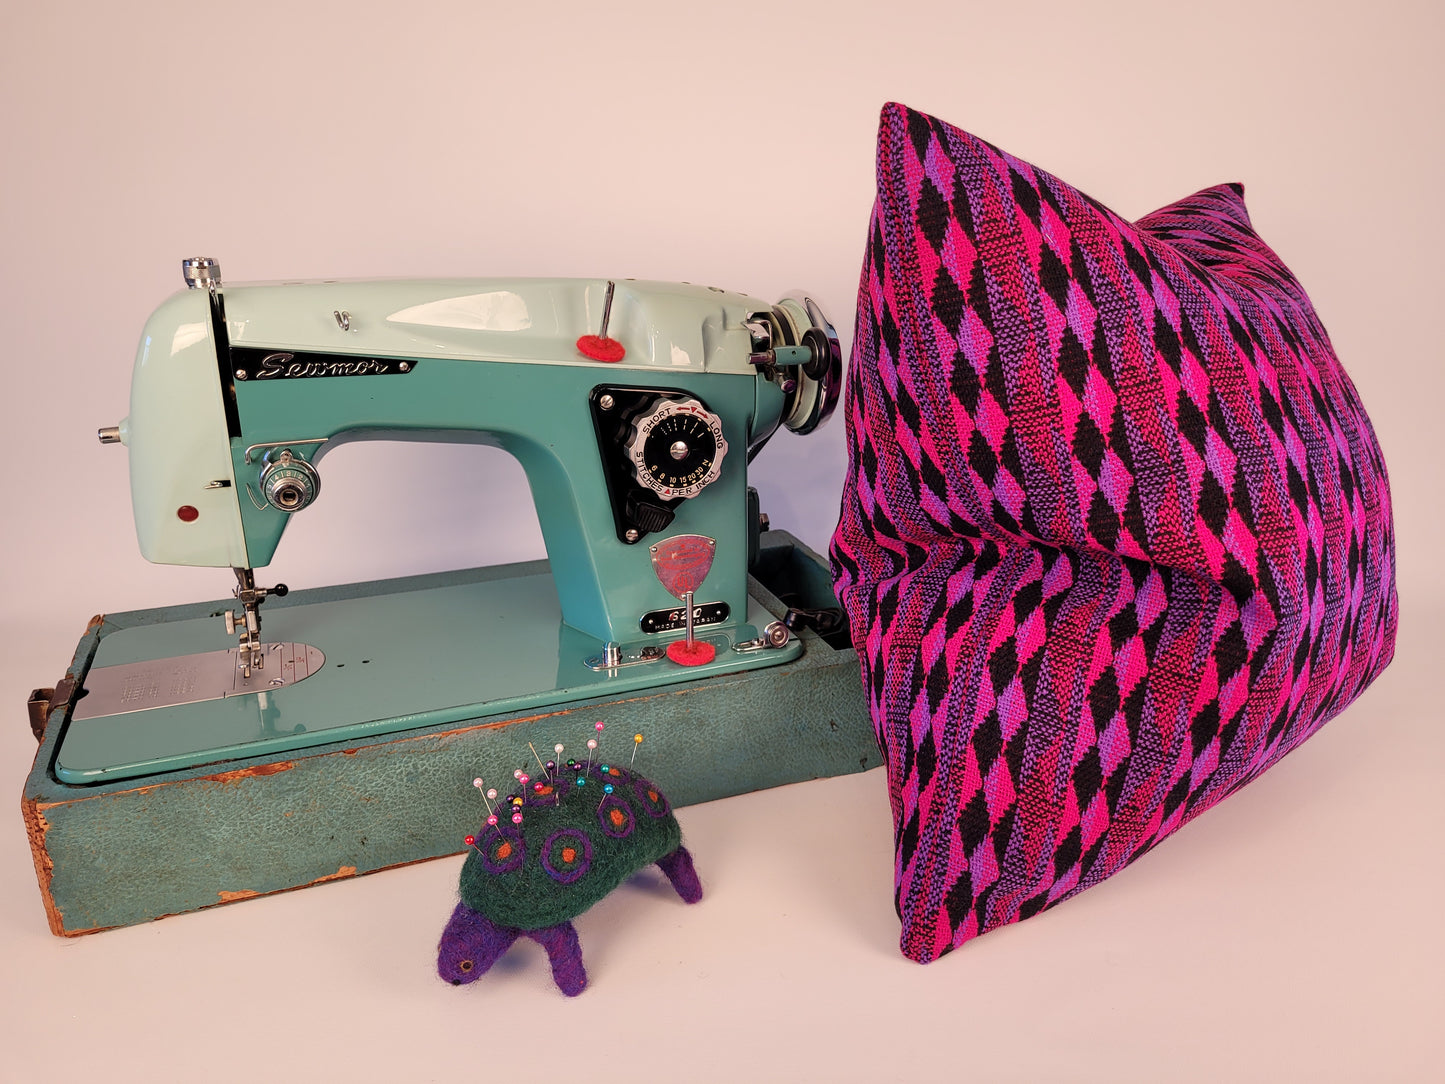 Vintage 1960s Hot Pink, Purple and Black Geometric Pillow 18" handmade on sewmor 620 vintage sewing machine from 1955